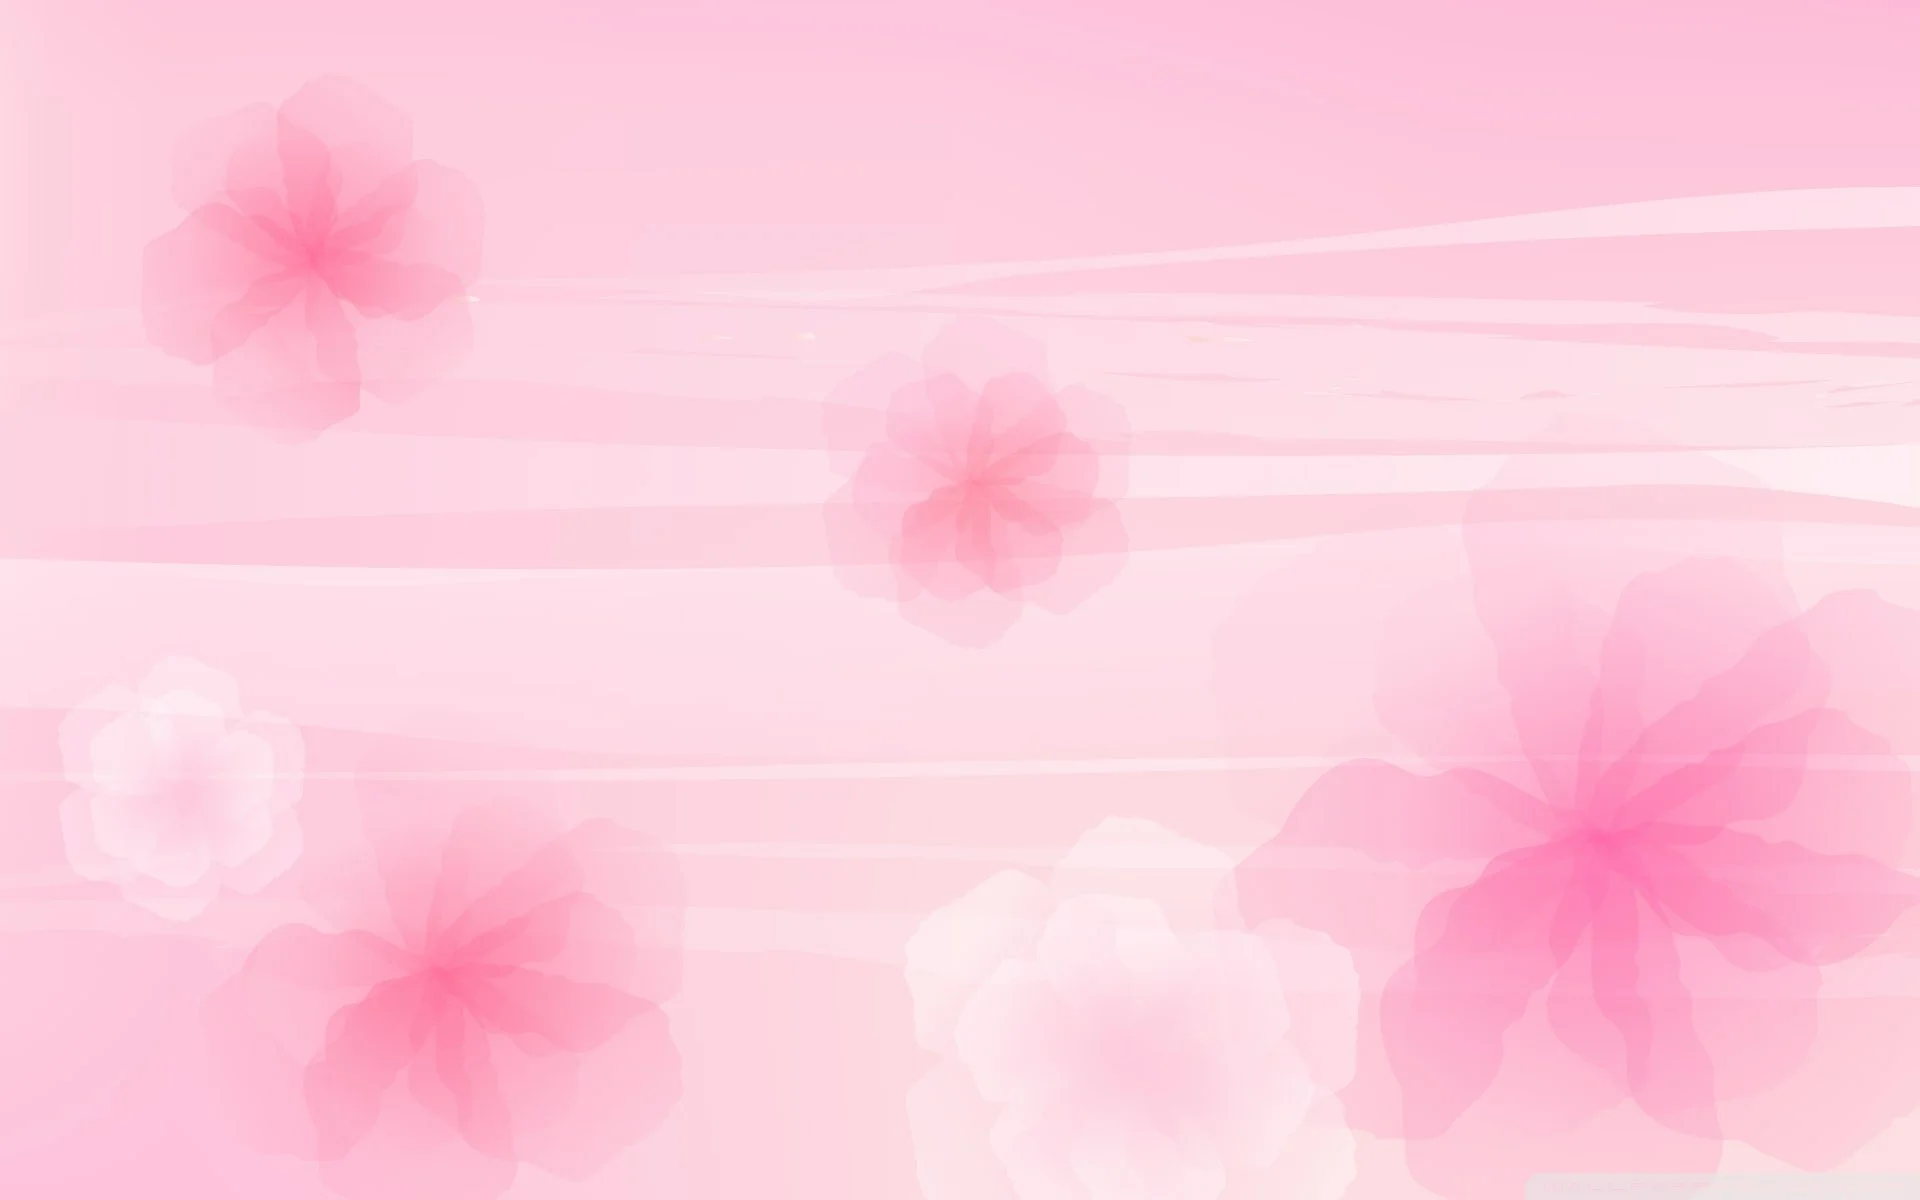 Pastel Lace Backgrounds Tumblr Lights You Themes Displaying Images For Pink Nursing Background. house site